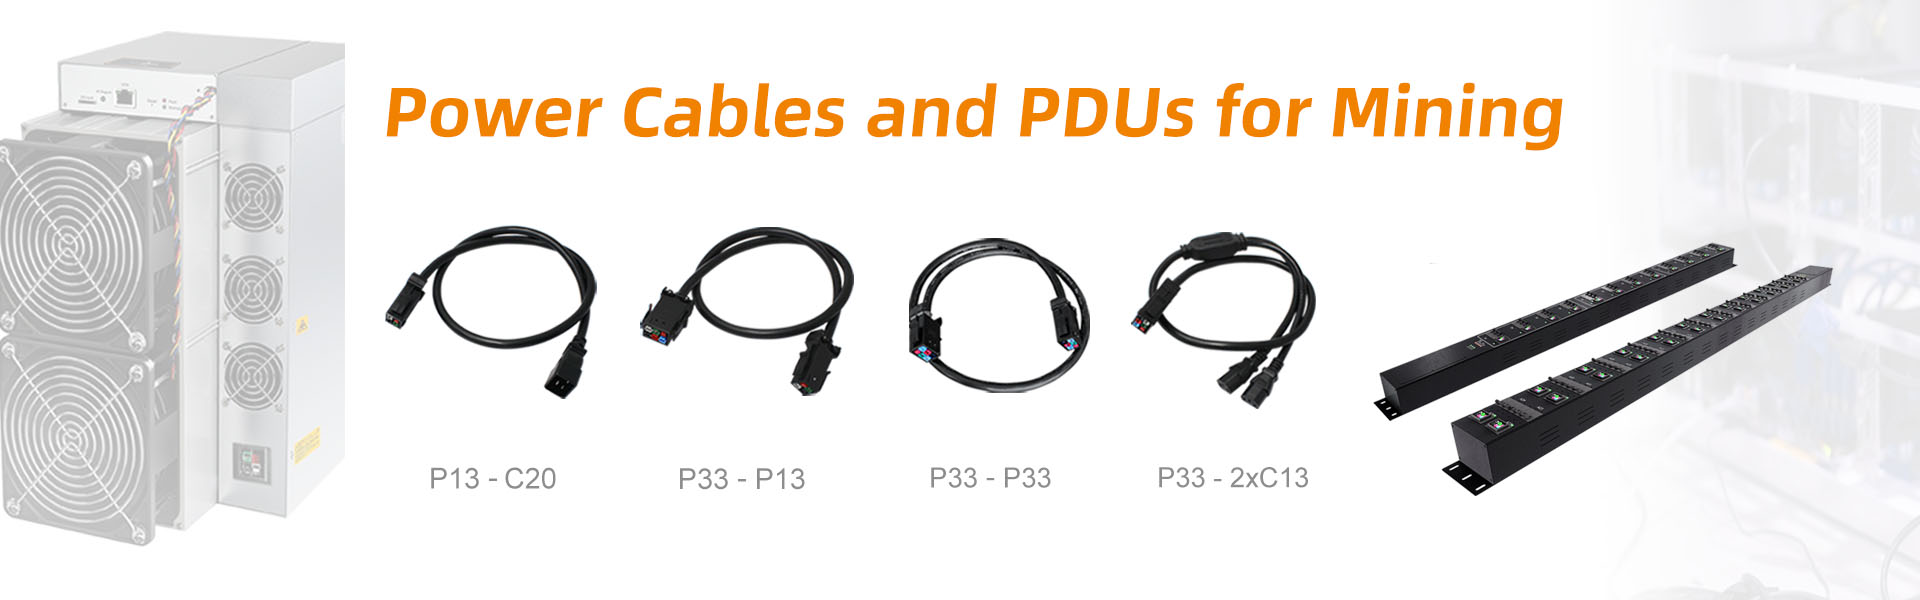 Power cables and PDUs